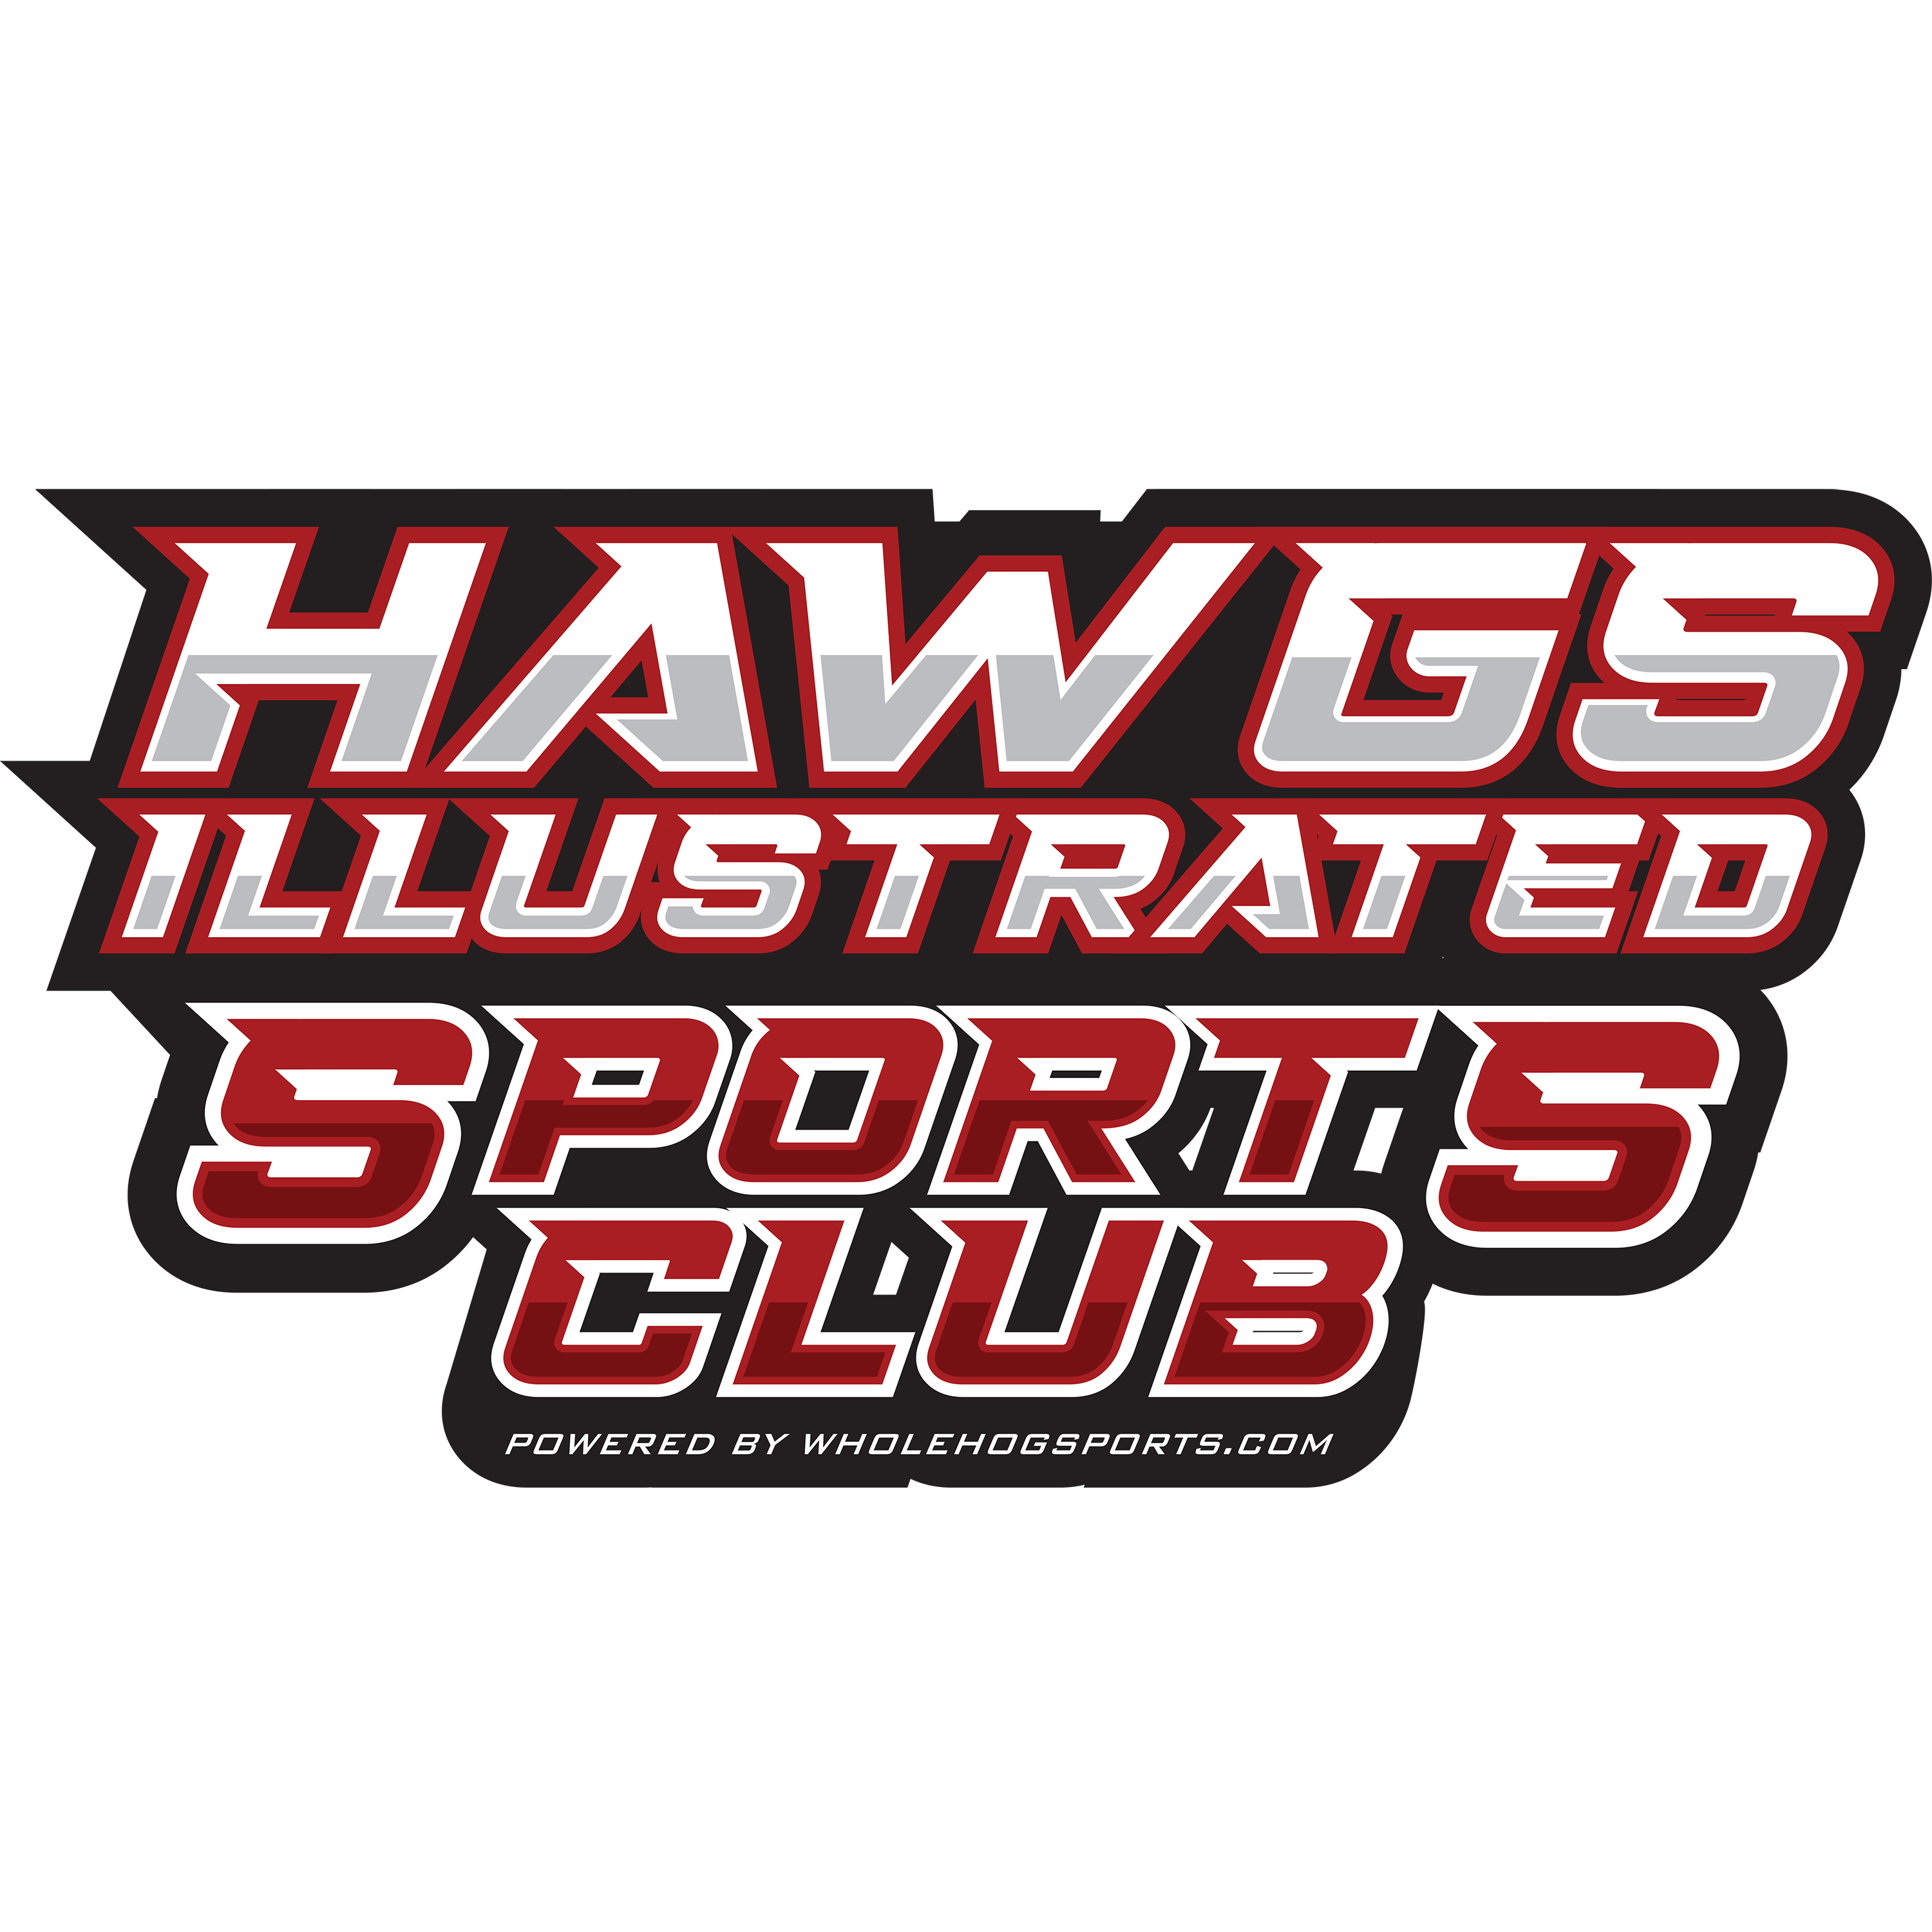 Hawgs Illustrated Sports Club Podcast: Guest speaker Colby Suggs